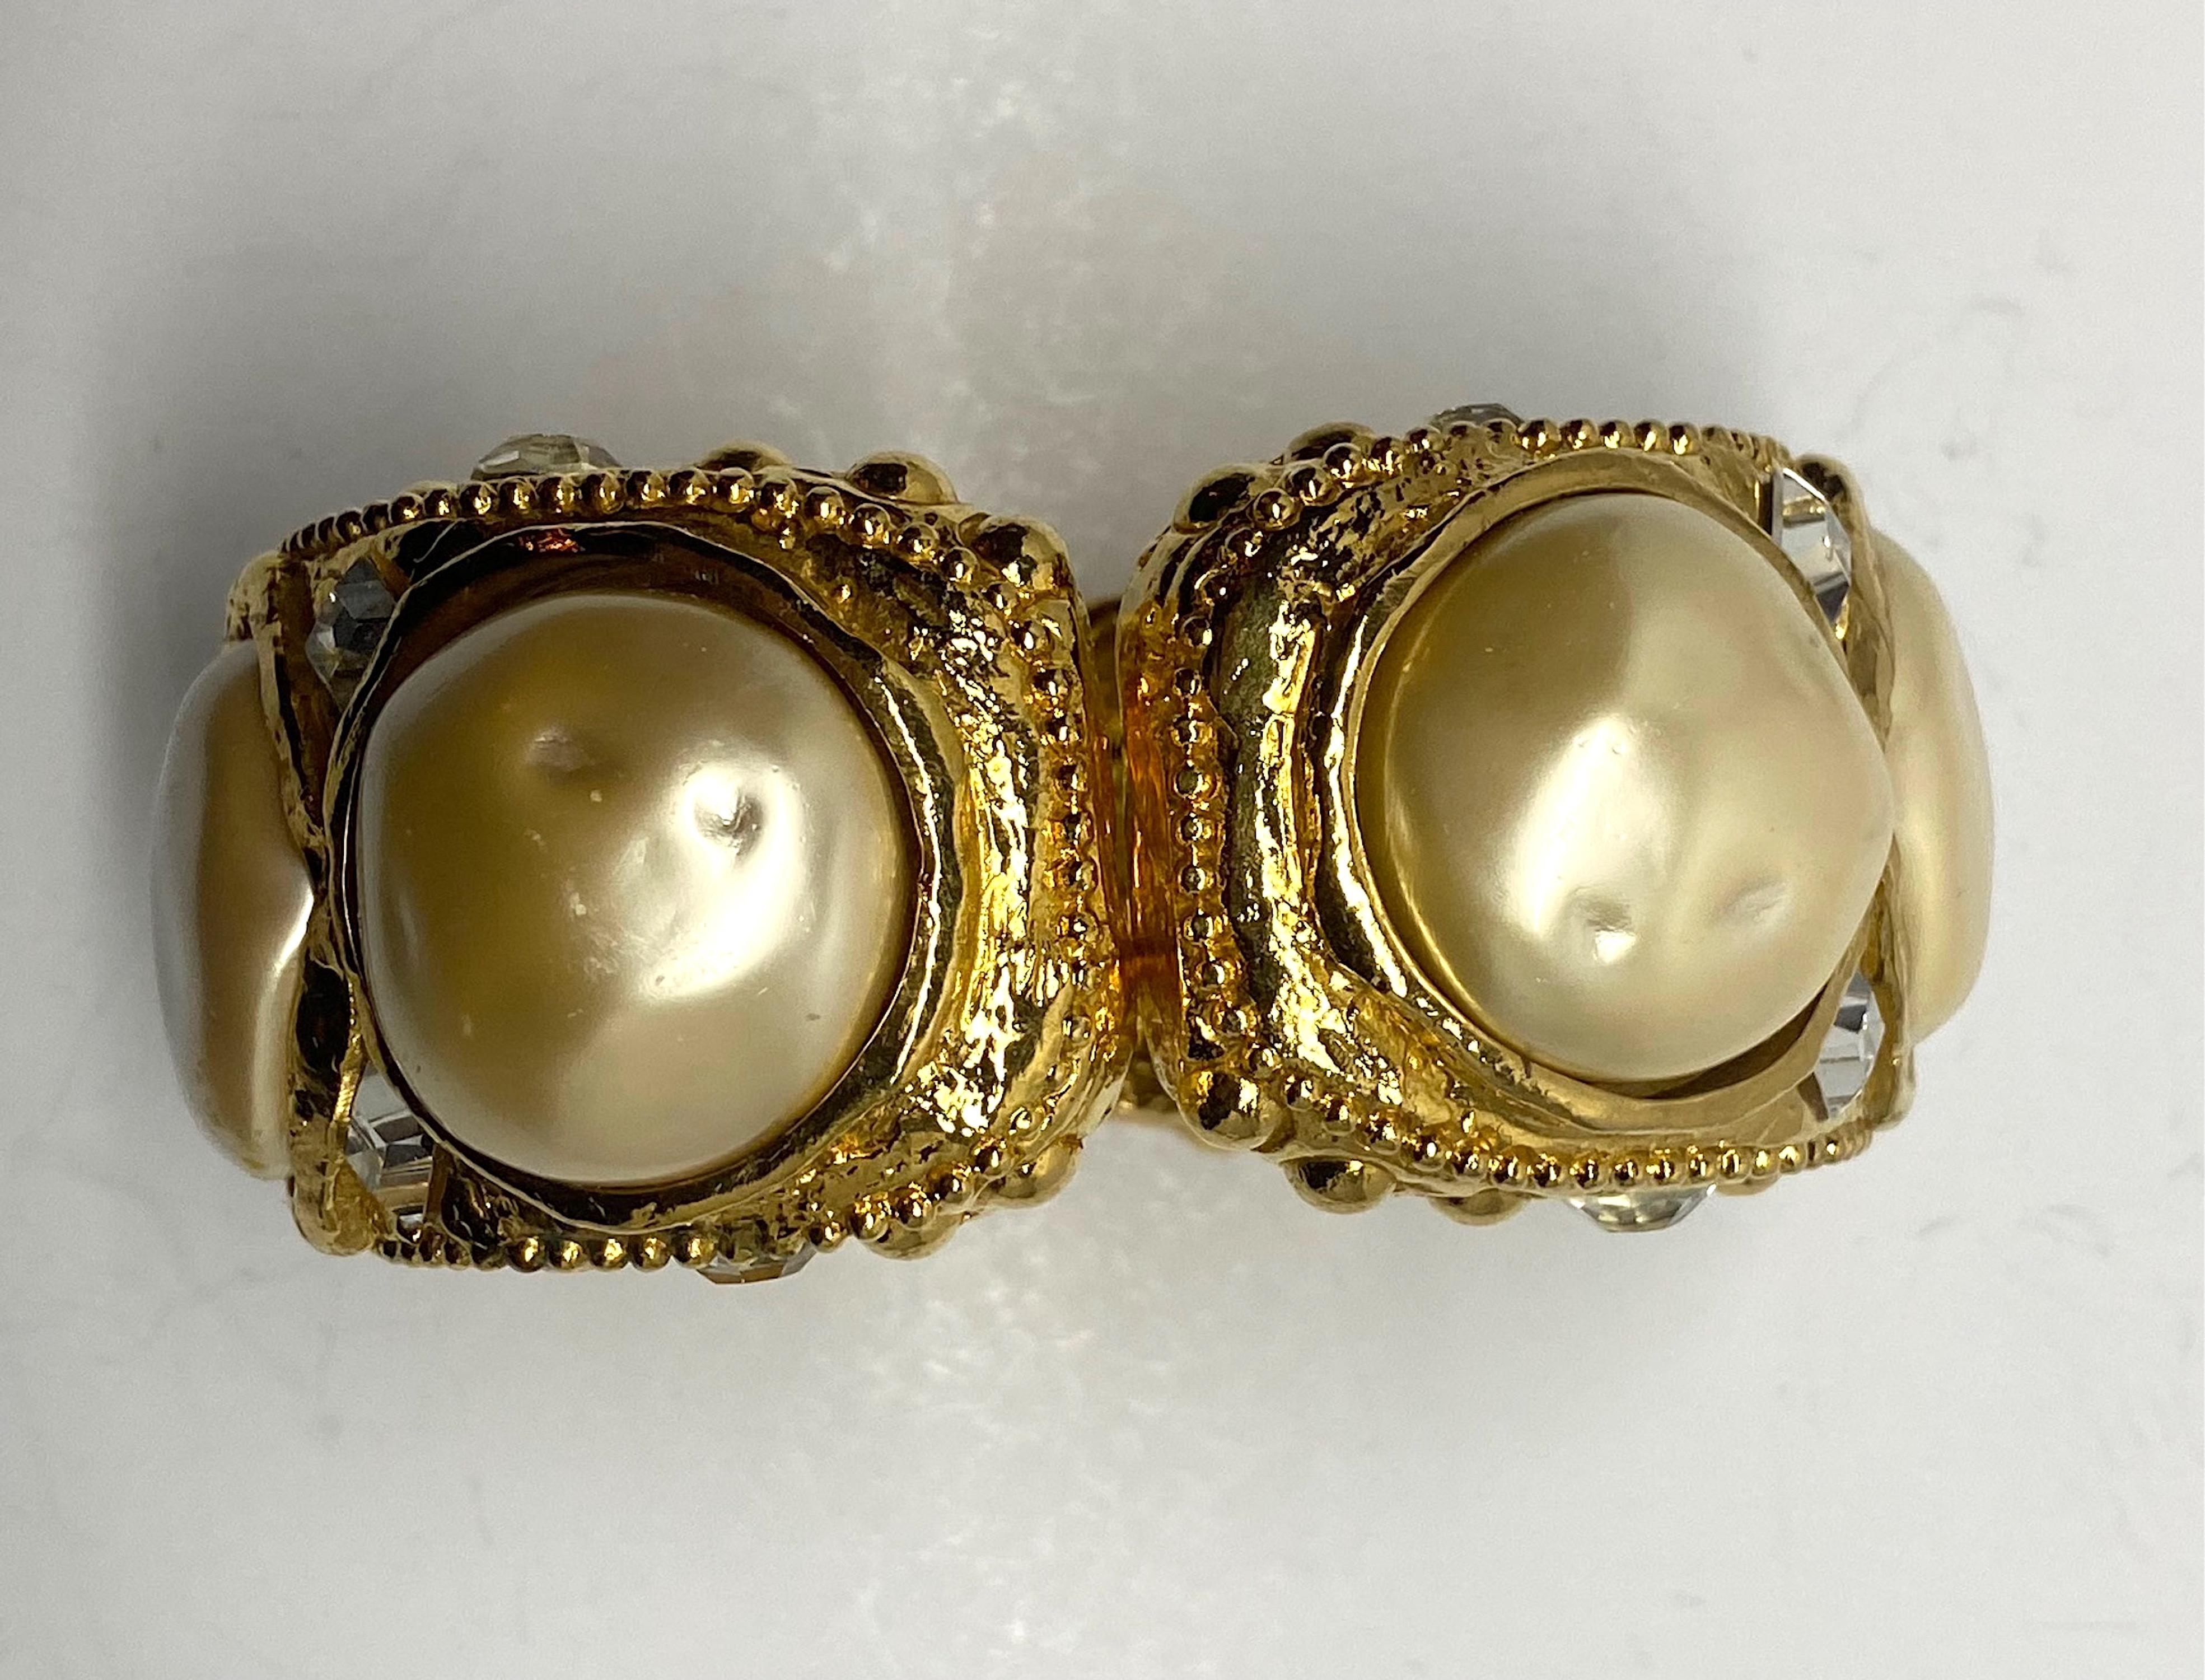 Alexis Lahellec Gold, Cristal and Pearl Byzantine Style 1980s Cuff Bracelet 6